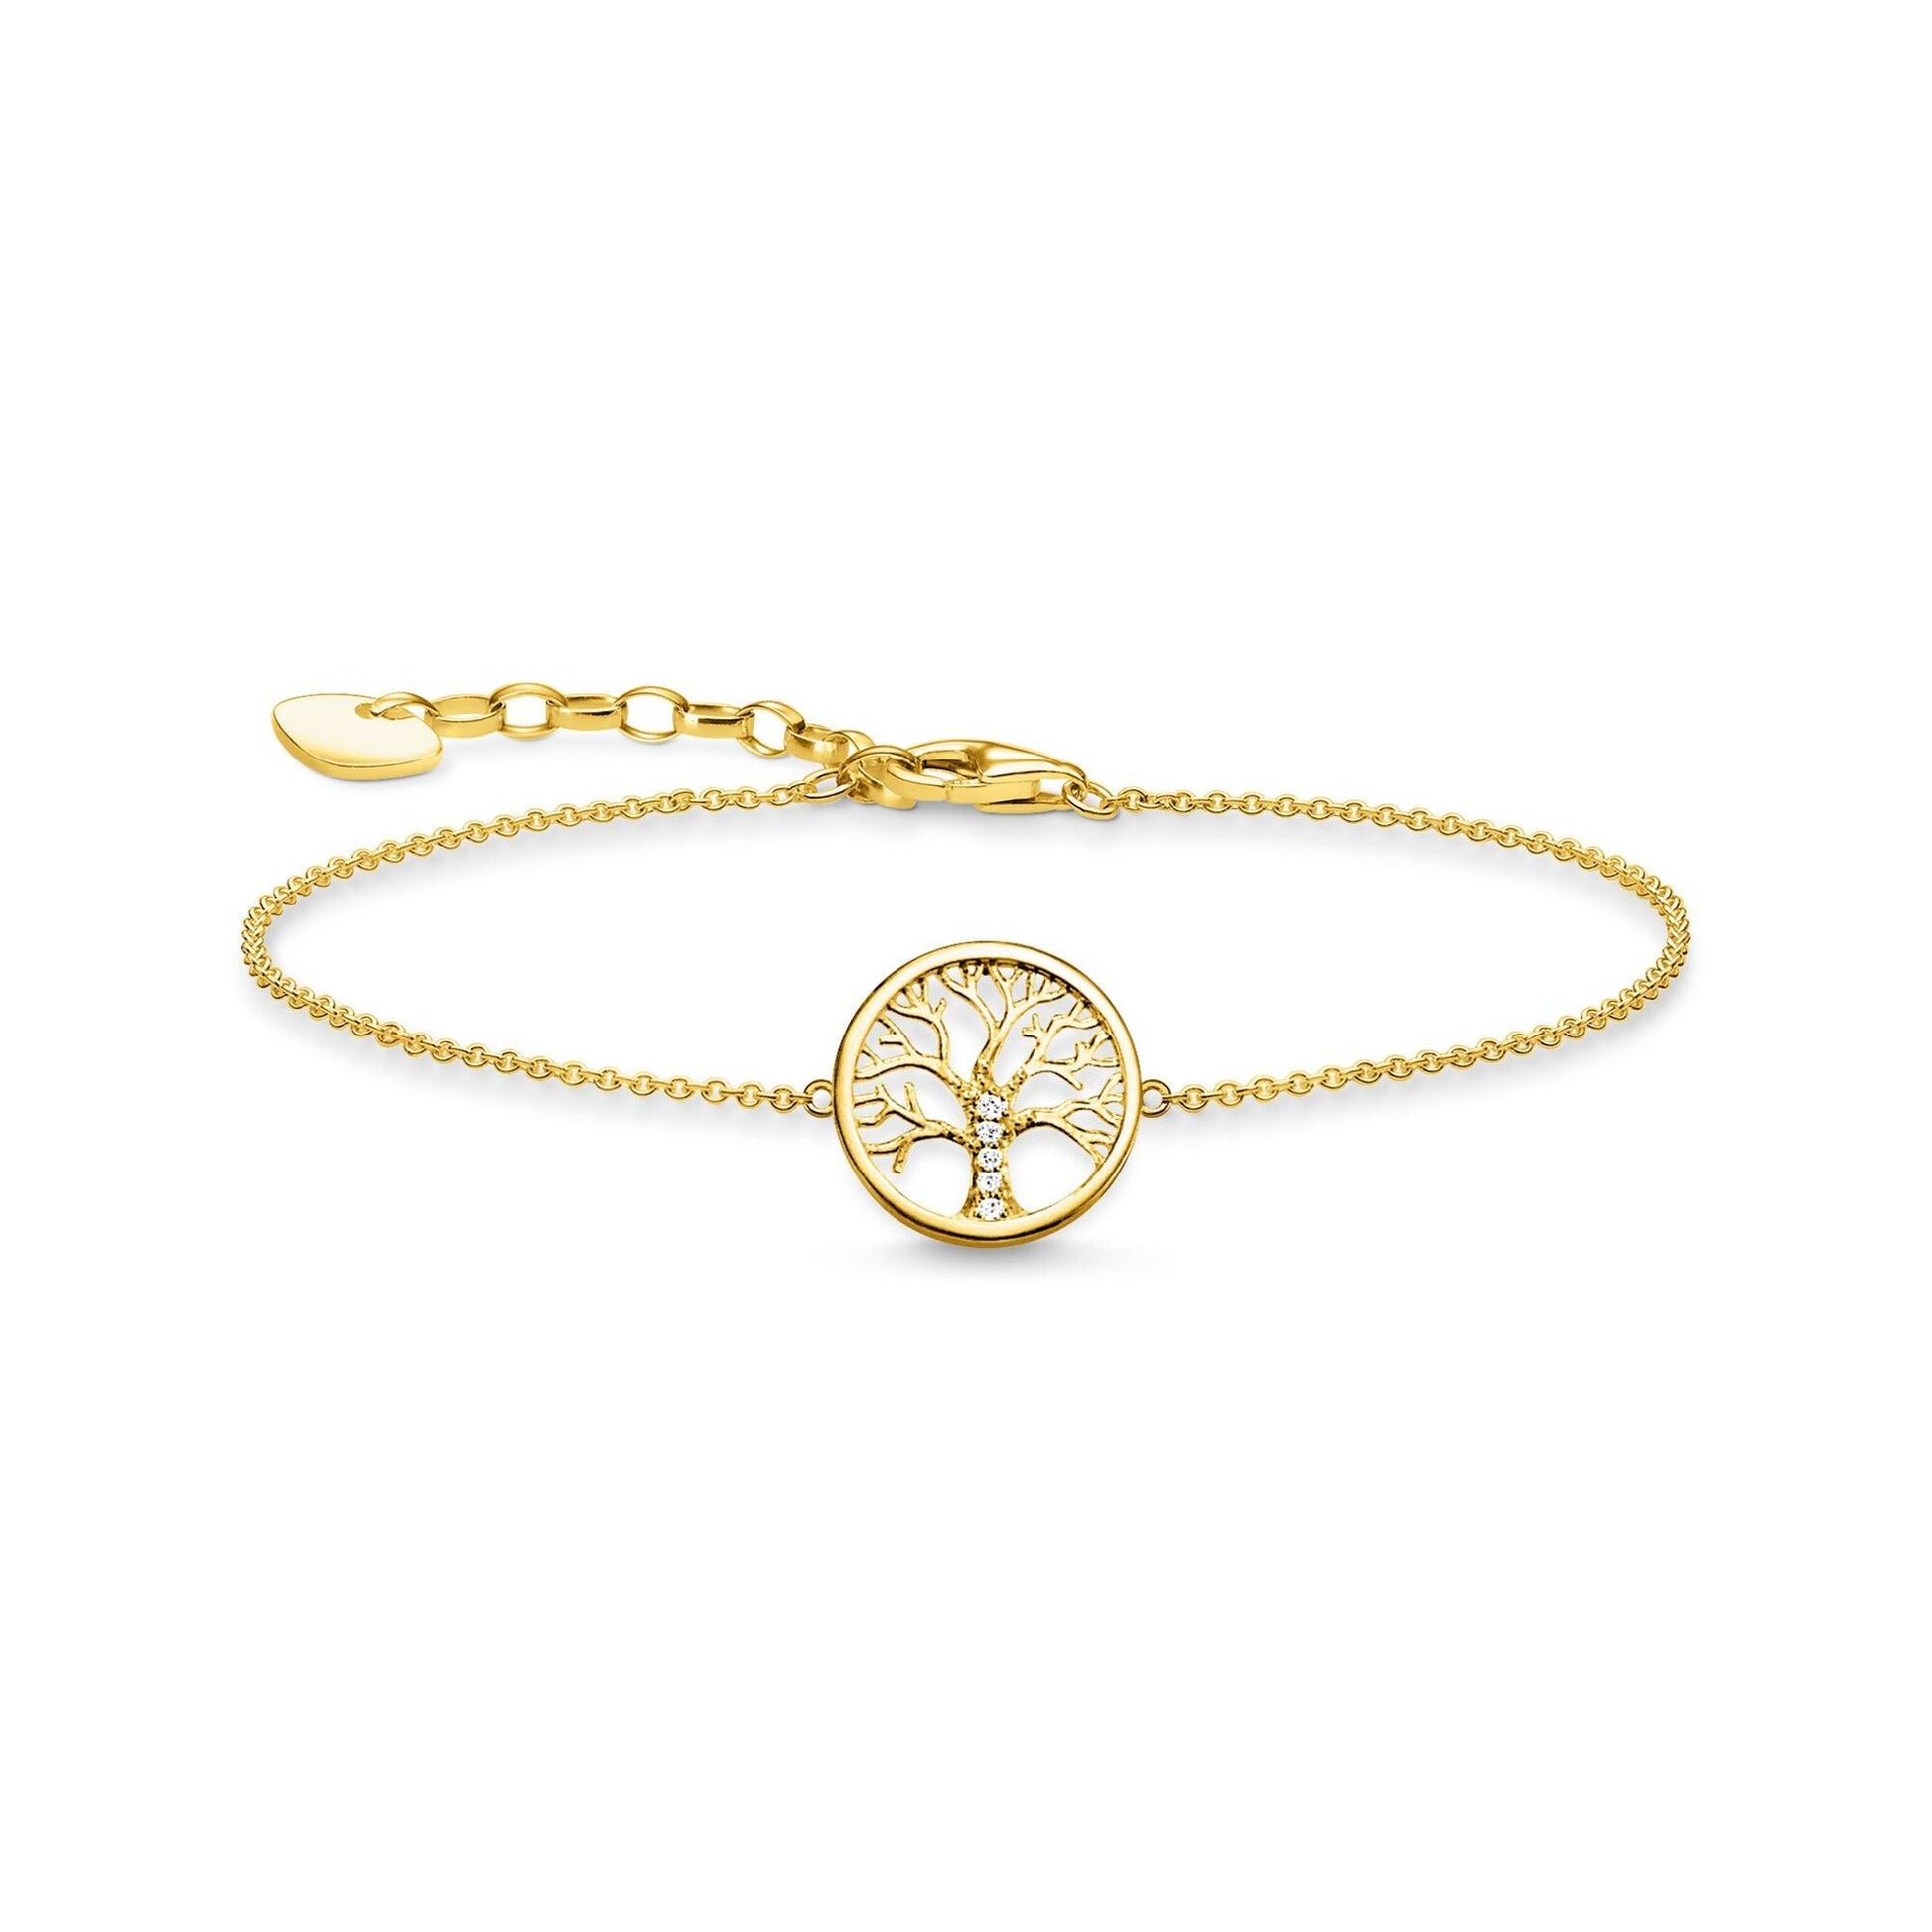 Thomas Sabo Yellow Gold-Plated Cubic Zirconia Tree of Life Bracelet A1868 - Judith Hart Jewellers